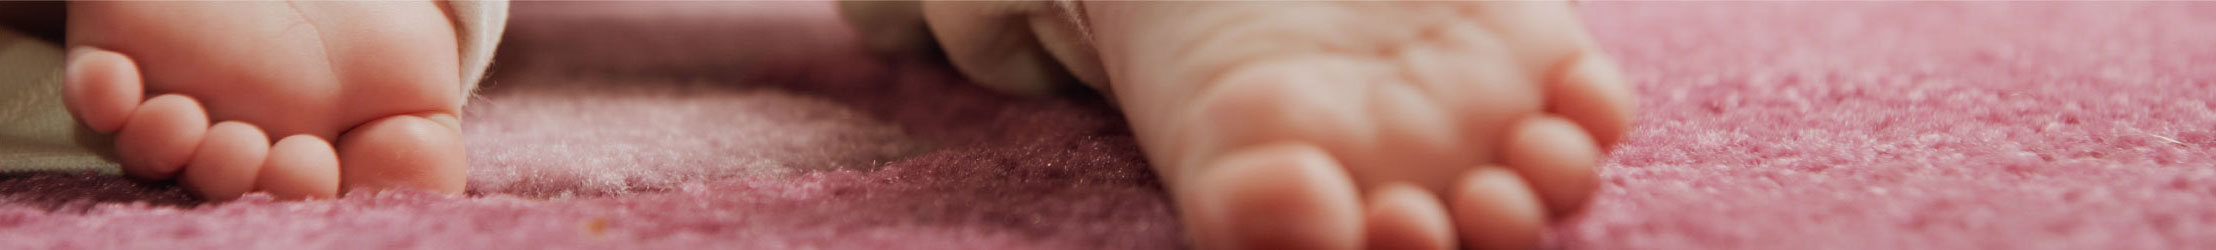 Close up of a babies feet resting on some pale pink carpet